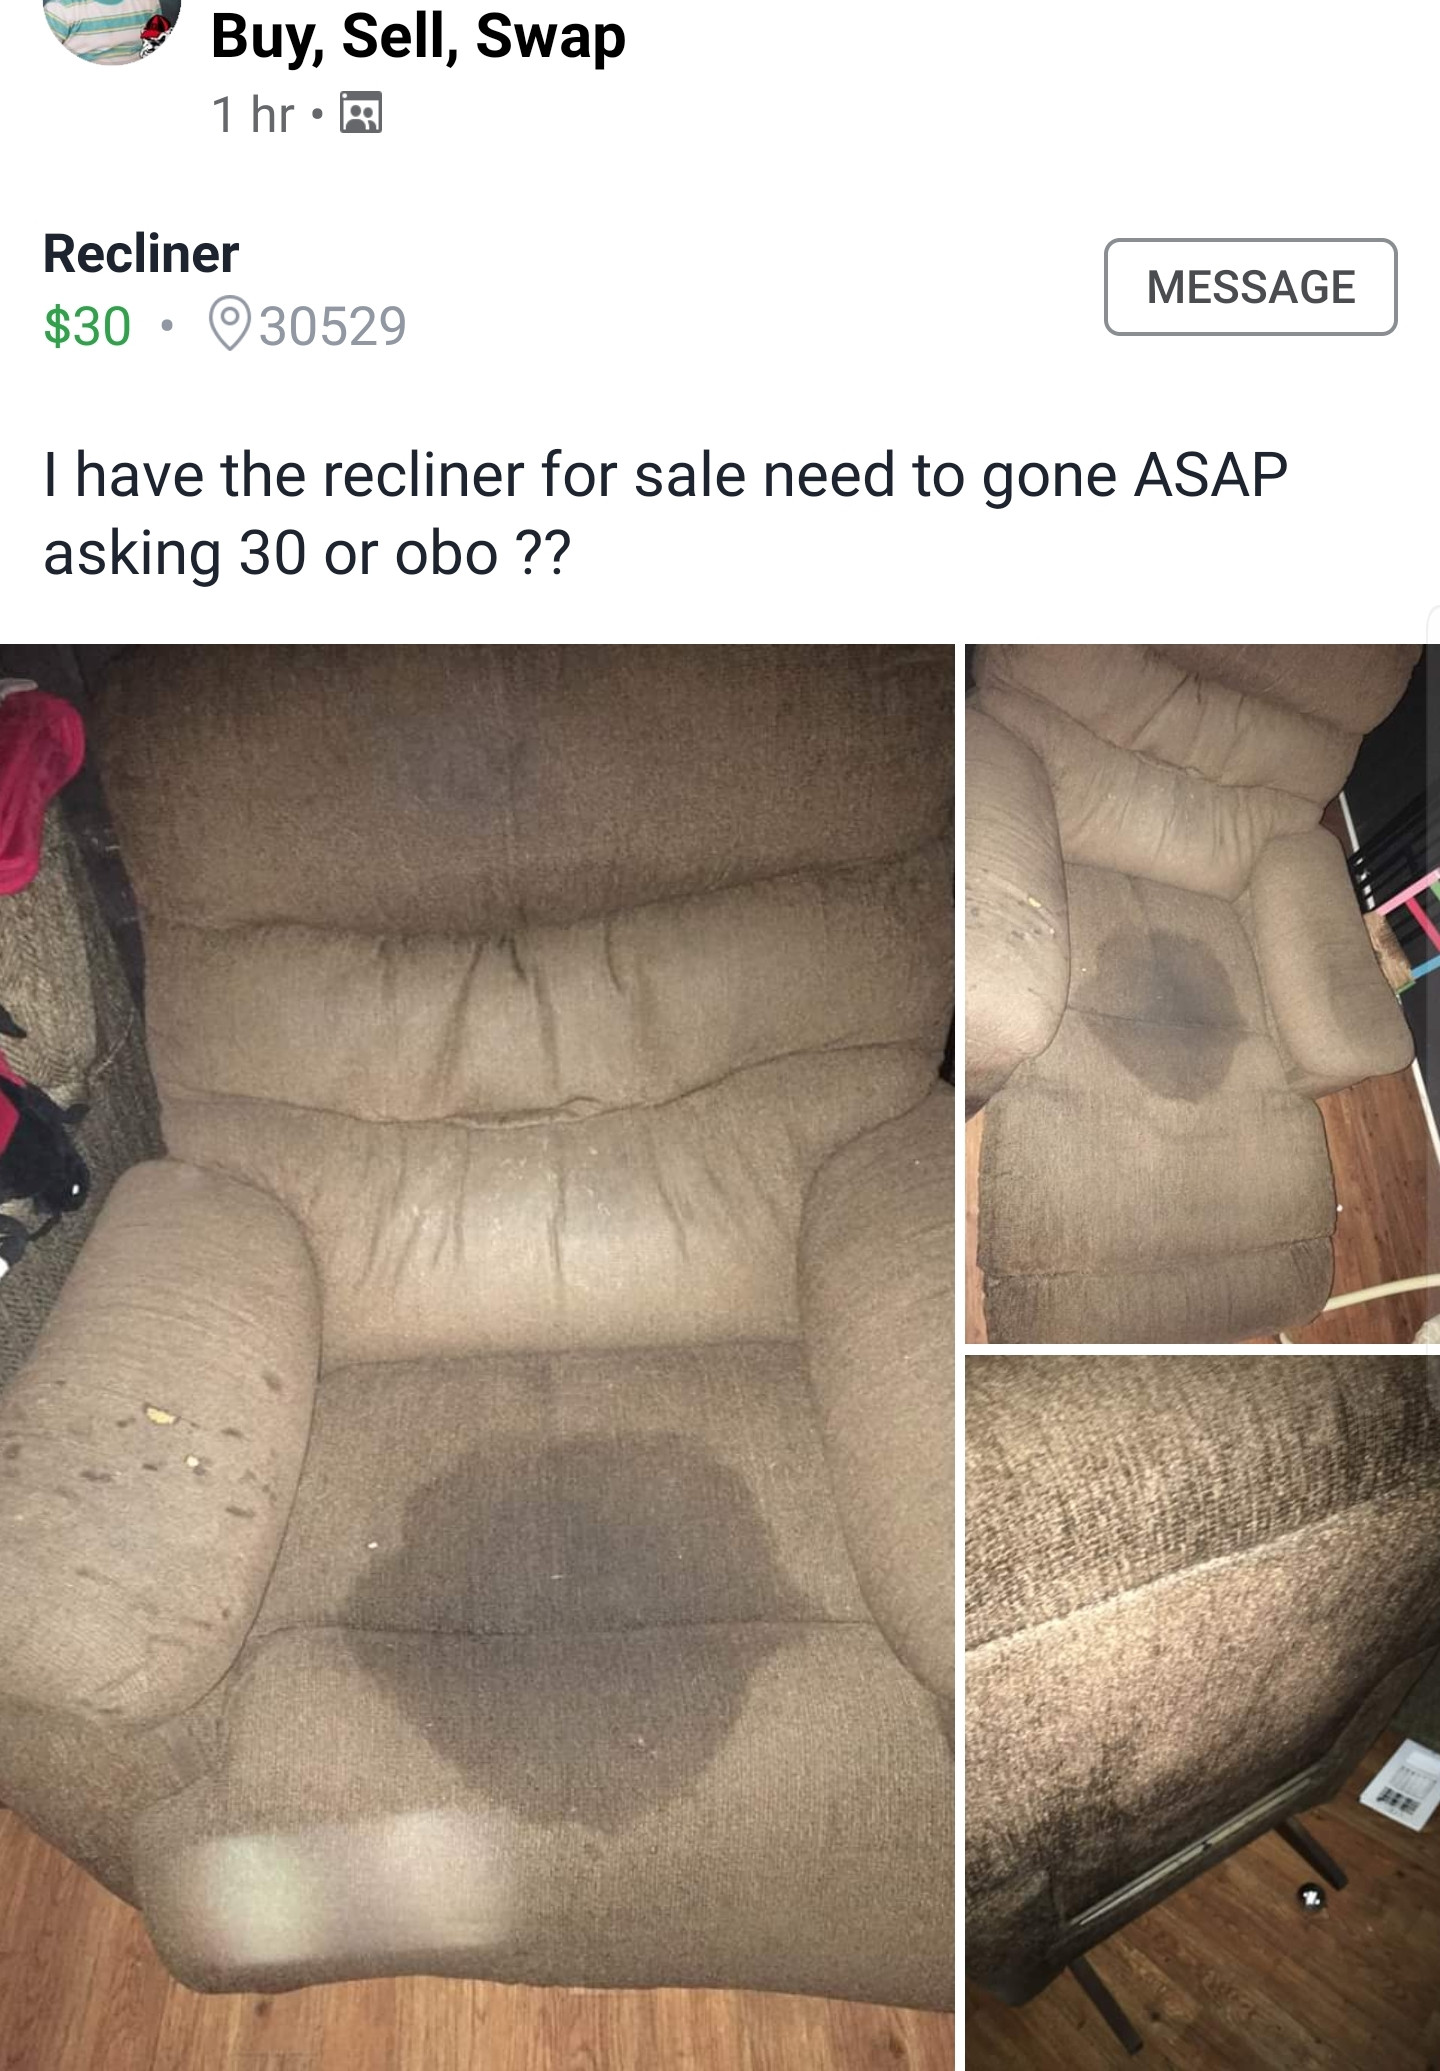 car seat cover - Buy, Sell,Swap 1 hr. Recliner $30. 30529 Message I have the recliner for sale need to gone Asap asking 30 or obo??